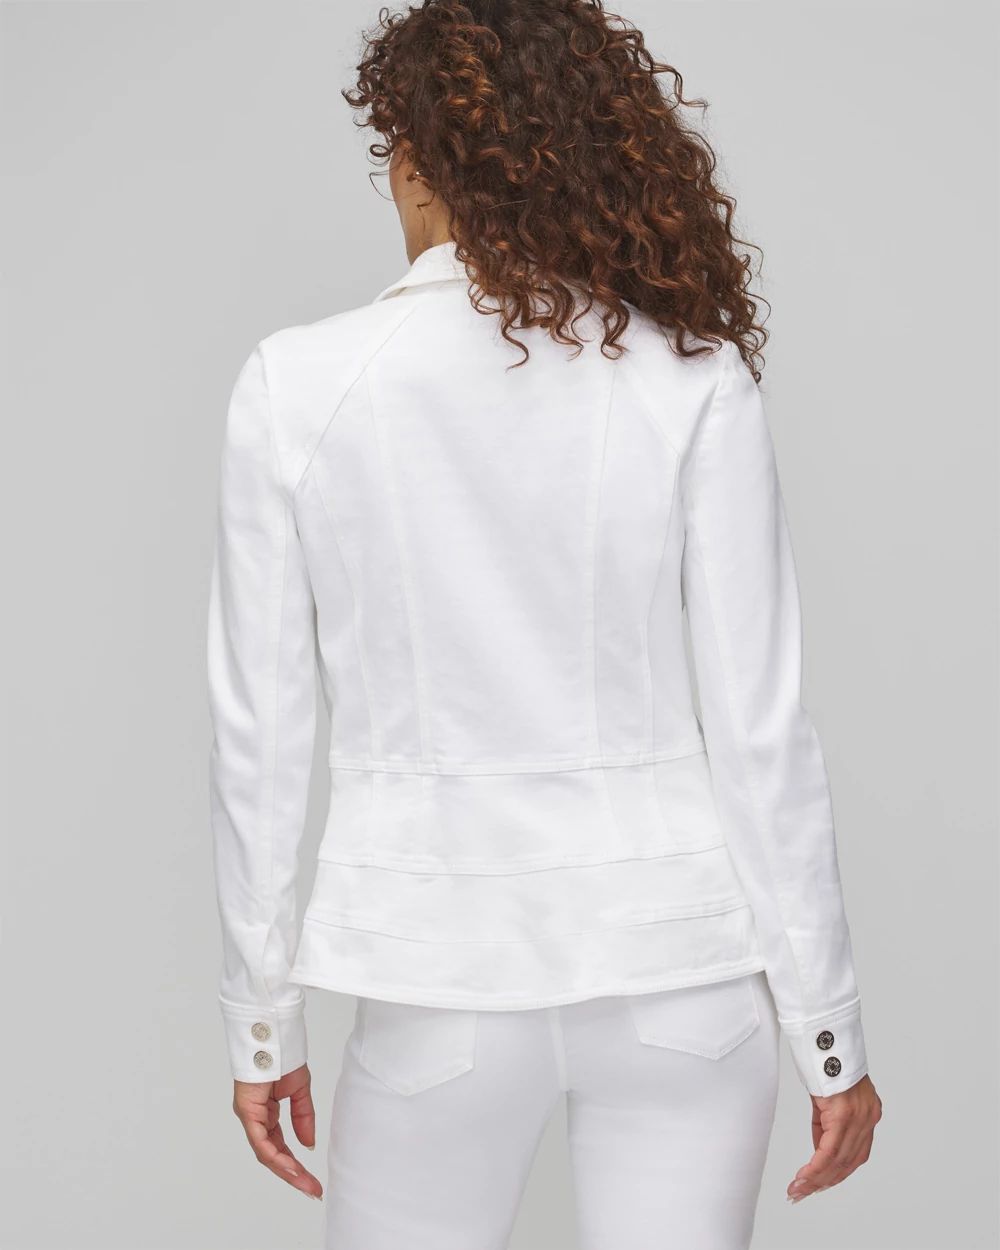 Seamed White Denim Jacket click to view larger image.